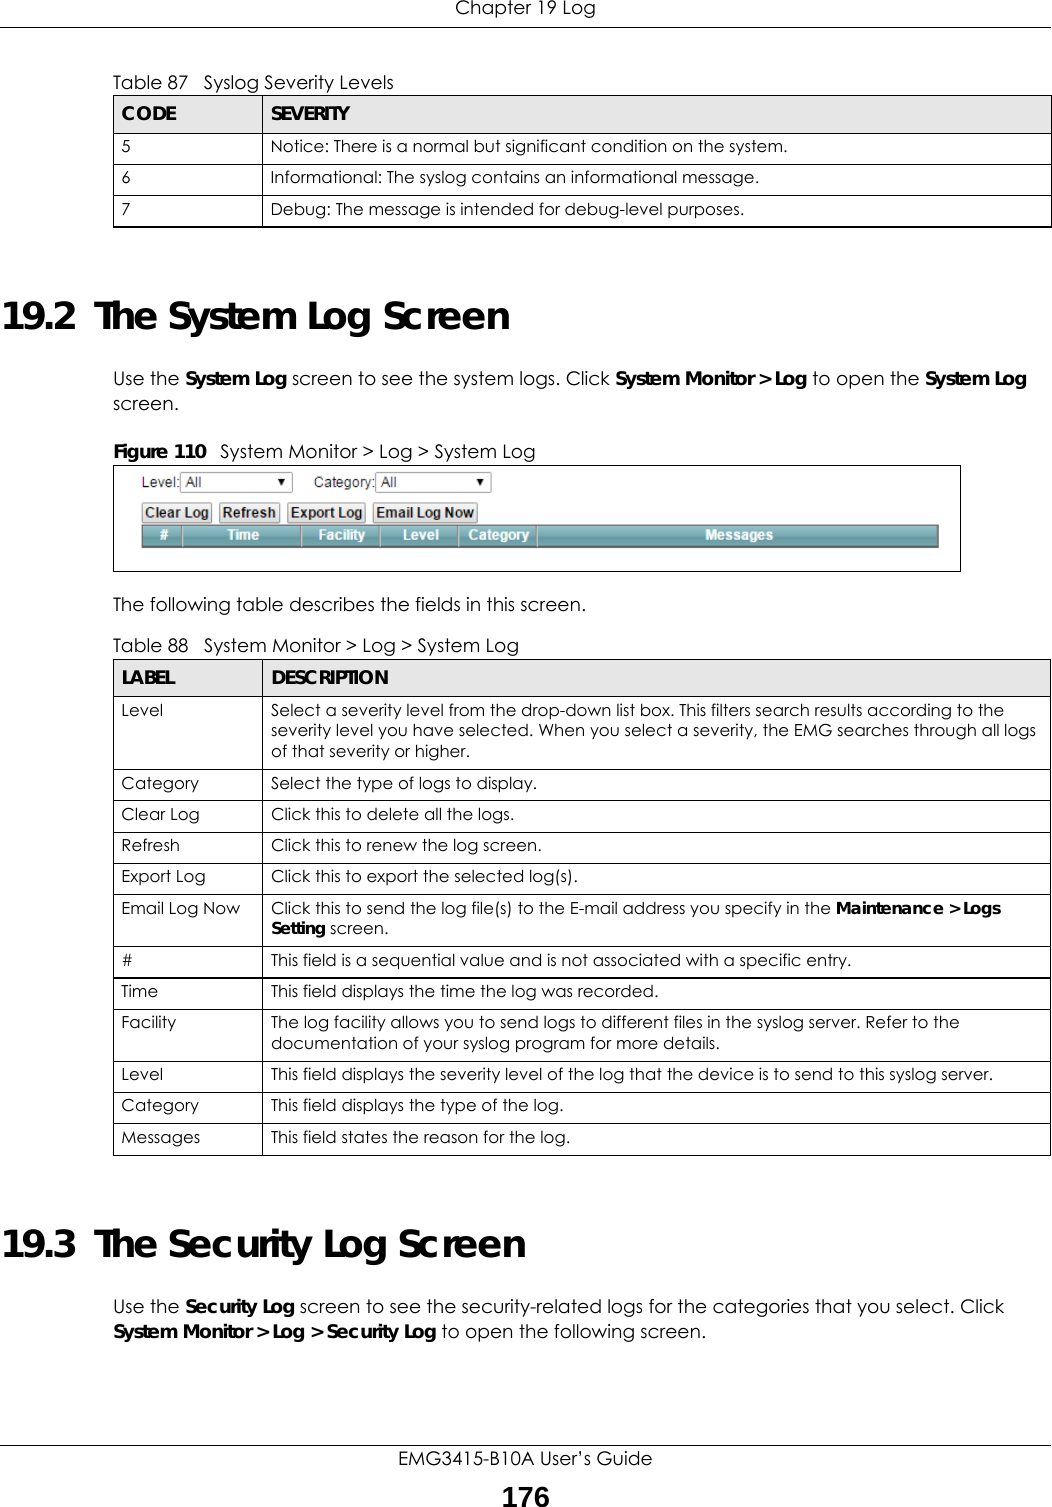 Chapter 19 LogEMG3415-B10A User’s Guide17619.2  The System Log Screen Use the System Log screen to see the system logs. Click System Monitor &gt; Log to open the System Log screen. Figure 110   System Monitor &gt; Log &gt; System LogThe following table describes the fields in this screen.   19.3  The Security Log ScreenUse the Security Log screen to see the security-related logs for the categories that you select. Click System Monitor &gt; Log &gt; Security Log to open the following screen. 5 Notice: There is a normal but significant condition on the system.6 Informational: The syslog contains an informational message.7 Debug: The message is intended for debug-level purposes.Table 87   Syslog Severity LevelsCODE SEVERITYTable 88   System Monitor &gt; Log &gt; System LogLABEL DESCRIPTIONLevel Select a severity level from the drop-down list box. This filters search results according to the severity level you have selected. When you select a severity, the EMG searches through all logs of that severity or higher. Category Select the type of logs to display.Clear Log  Click this to delete all the logs. Refresh Click this to renew the log screen. Export Log Click this to export the selected log(s).Email Log Now Click this to send the log file(s) to the E-mail address you specify in the Maintenance &gt; Logs Setting screen.#This field is a sequential value and is not associated with a specific entry.Time  This field displays the time the log was recorded. Facility  The log facility allows you to send logs to different files in the syslog server. Refer to the documentation of your syslog program for more details.Level This field displays the severity level of the log that the device is to send to this syslog server.Category This field displays the type of the log.Messages This field states the reason for the log.